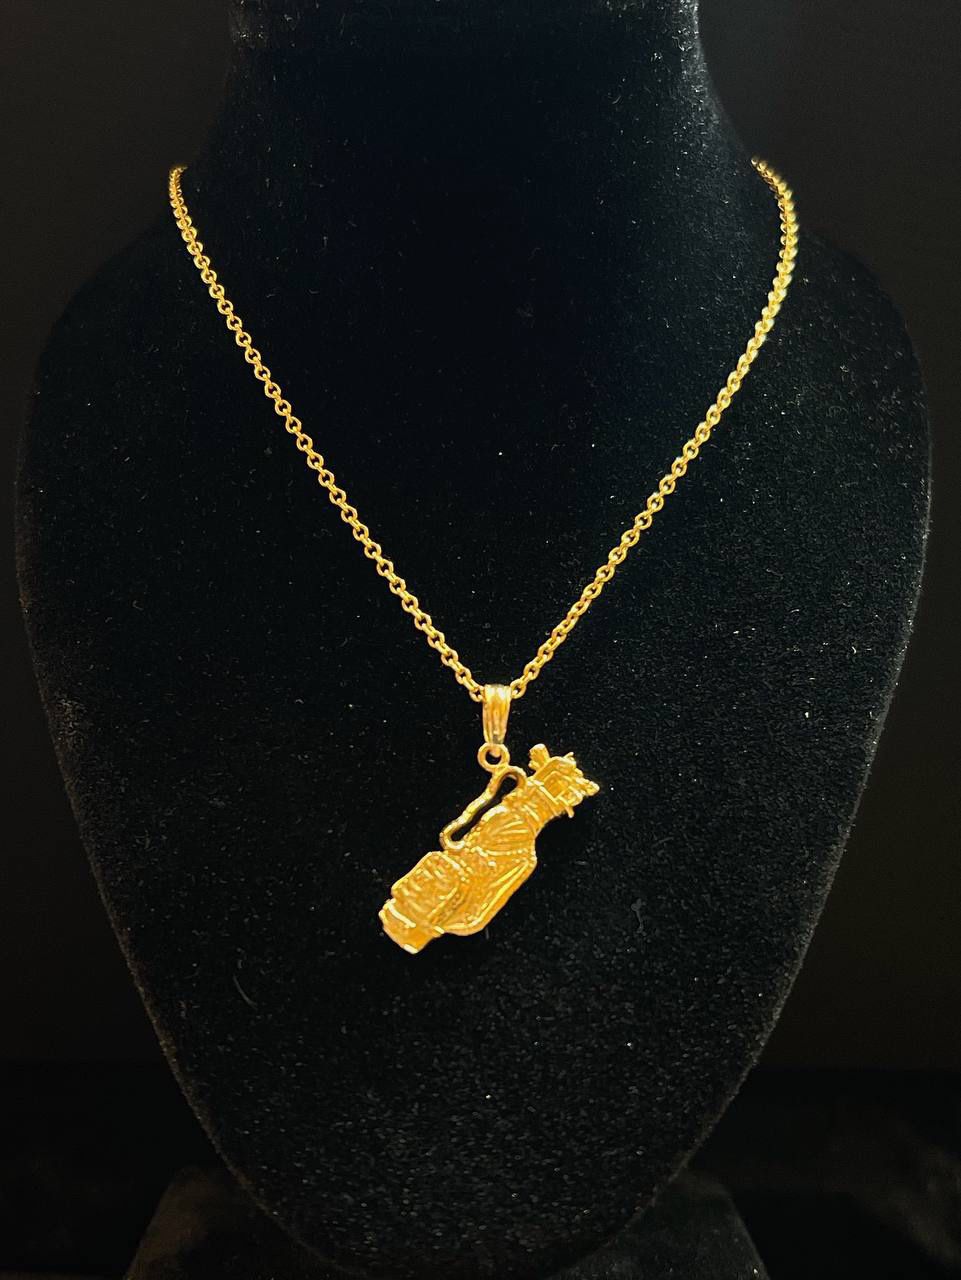 14k yellow gold chain with gold pendant